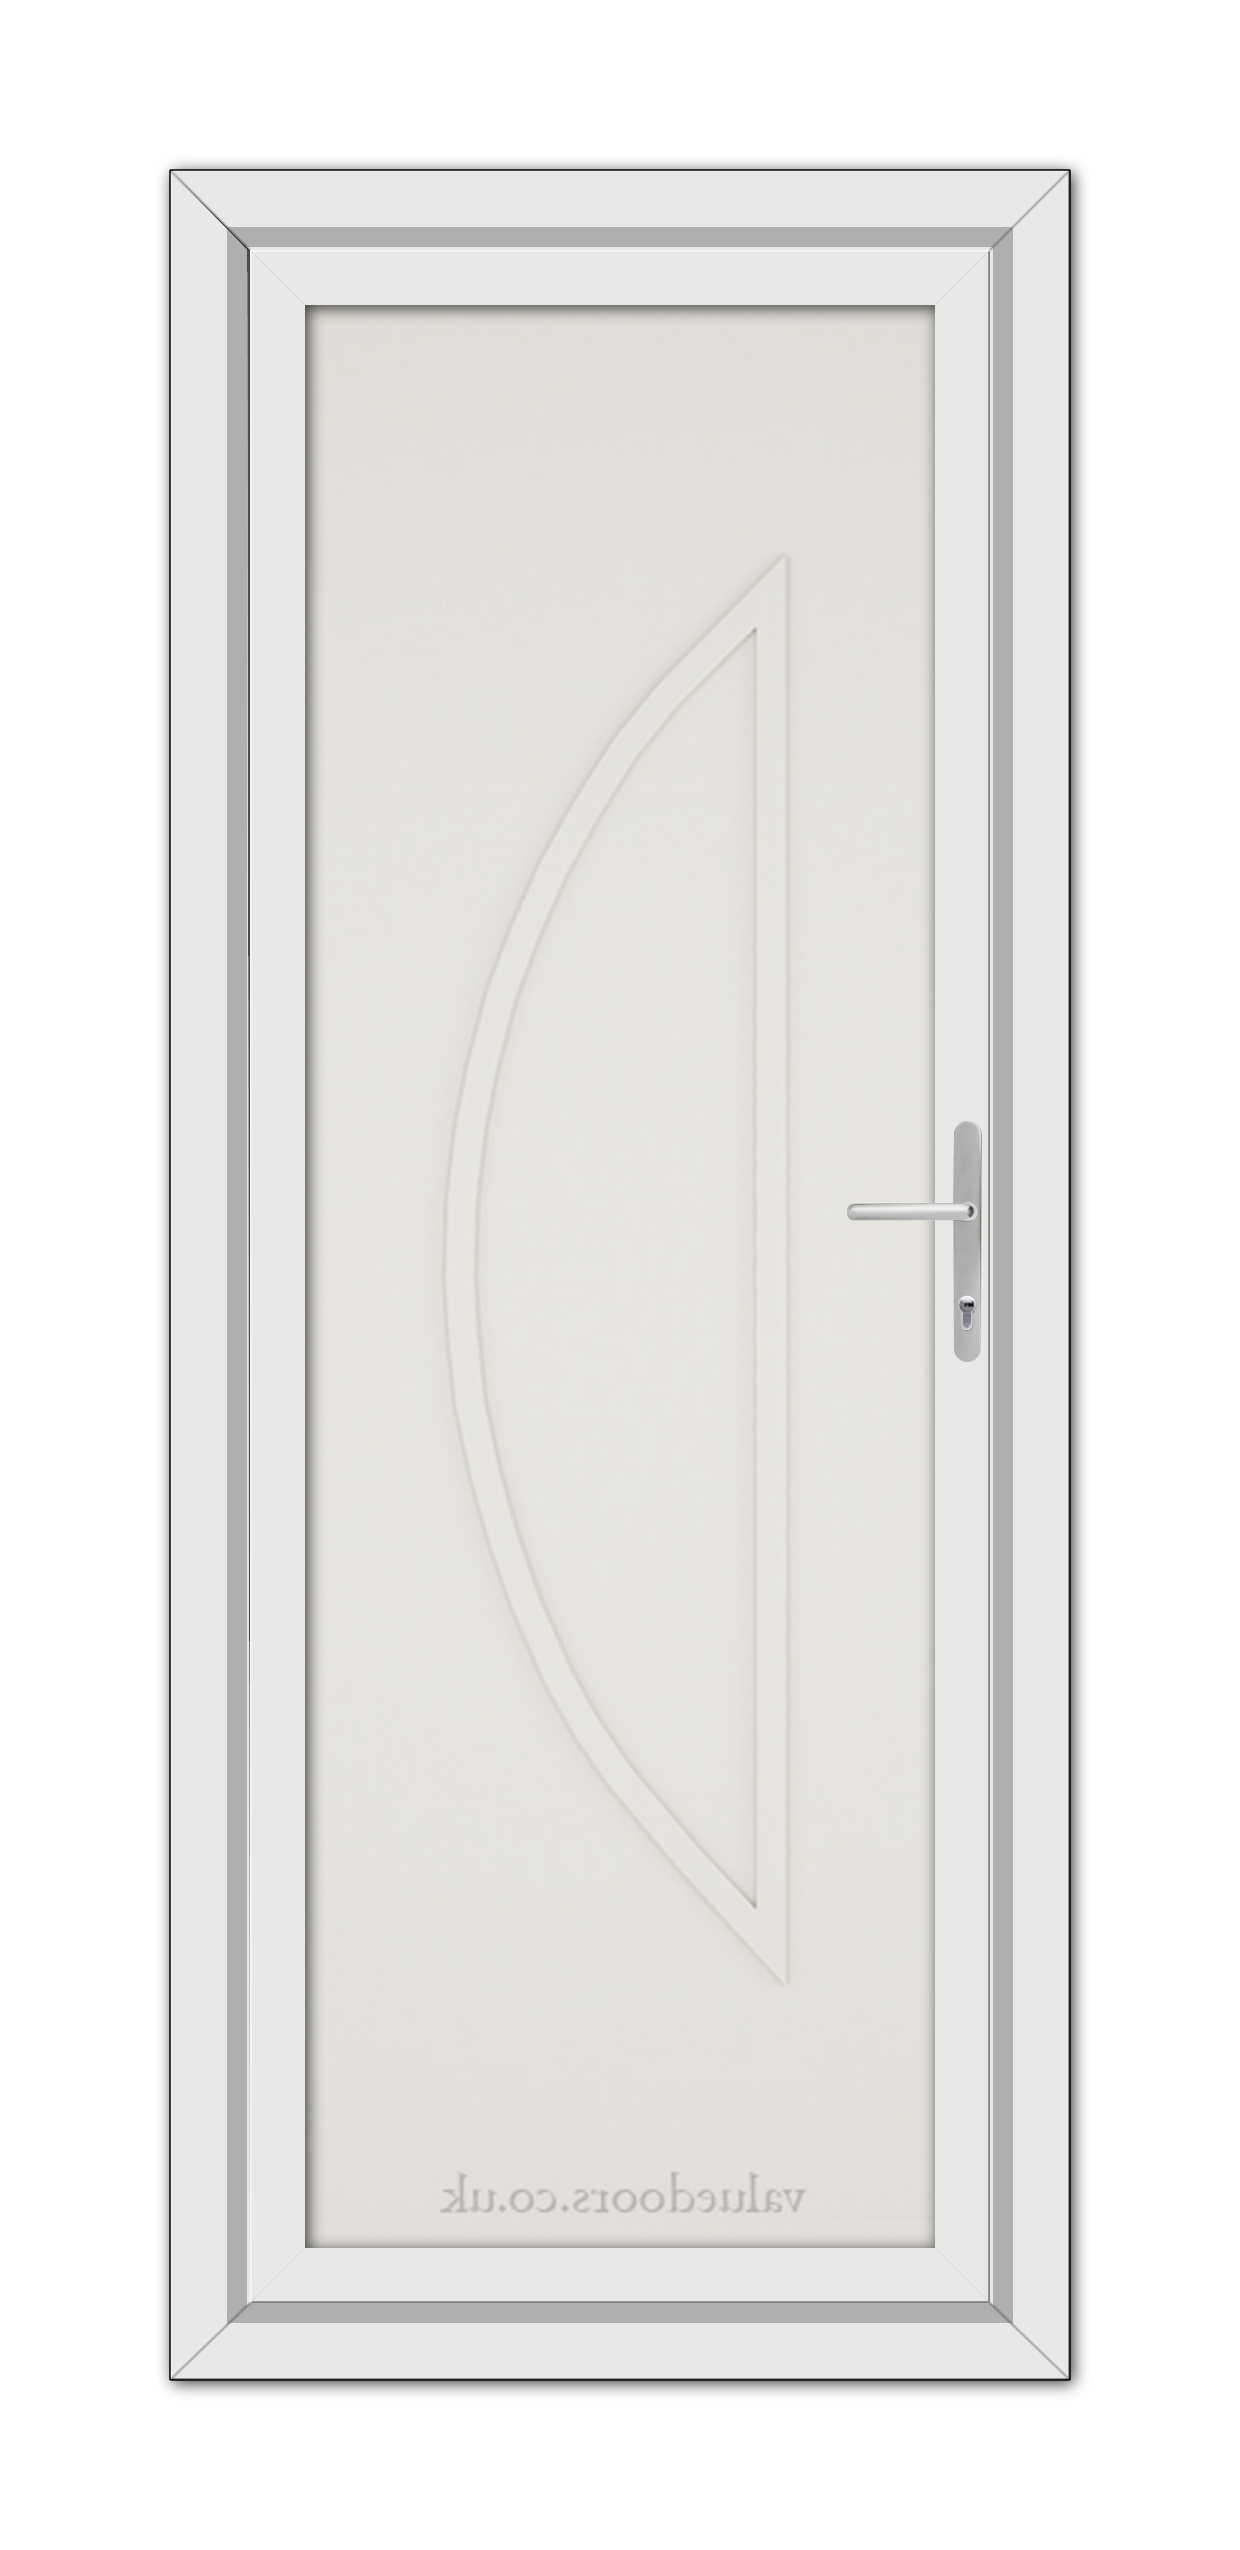 A White Cream Modern 5051 Solid uPVC Door with a curved design.